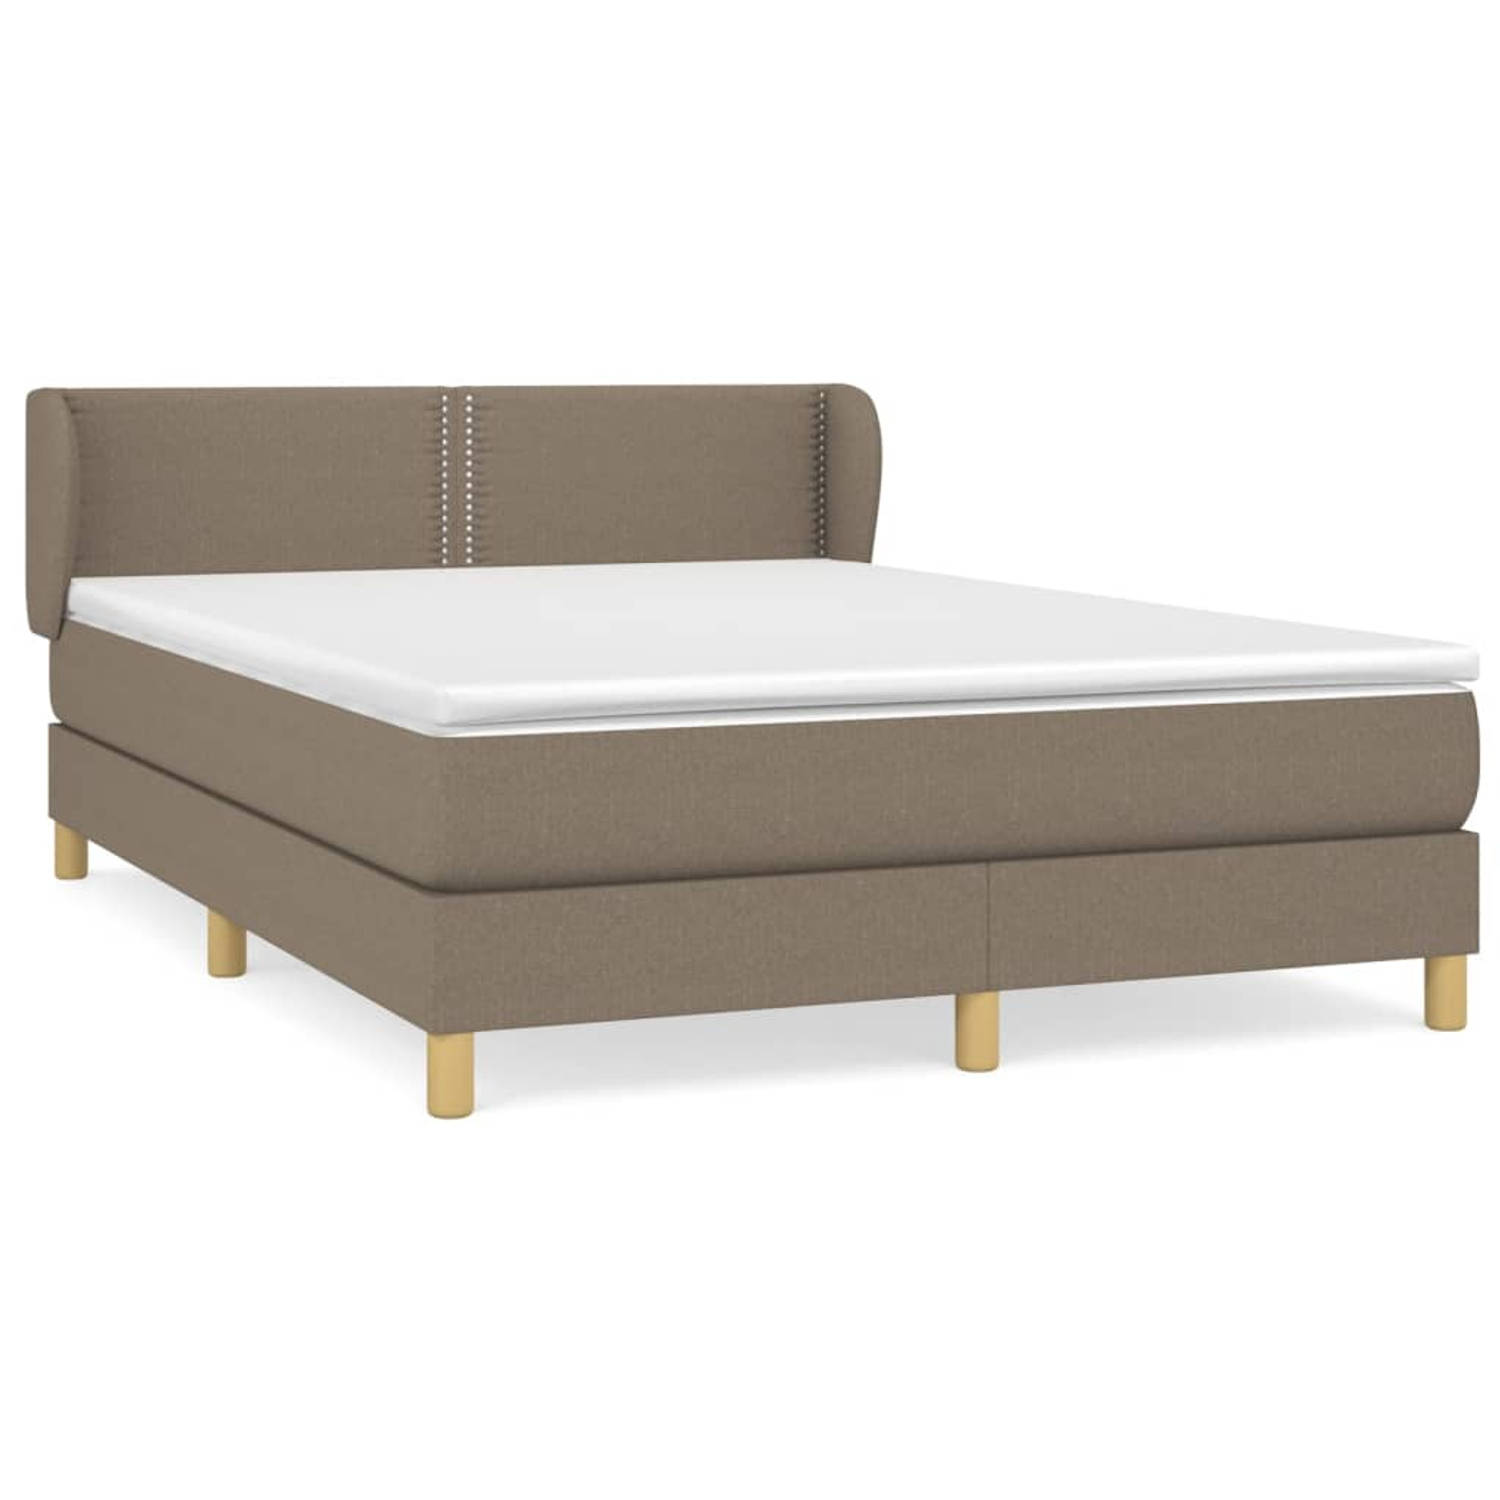 The Living Store Boxspring met matras stof taupe 140x190 cm - Bed